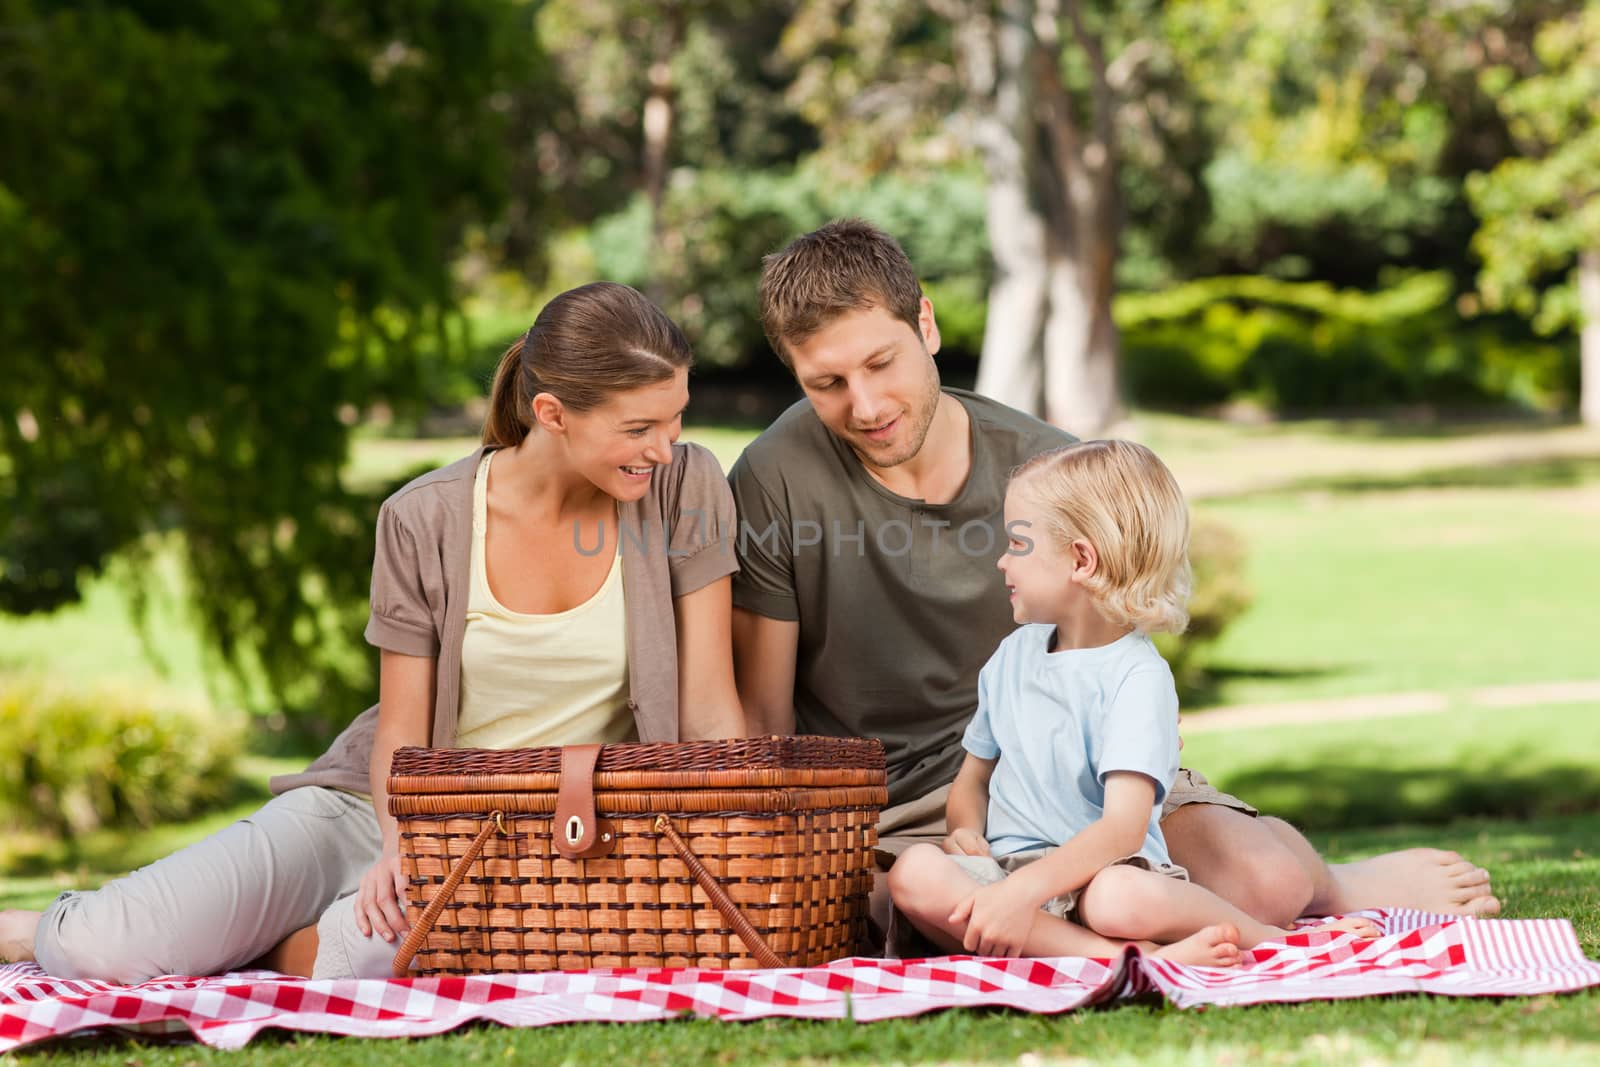 Joyful family picnicking in the park during the summer